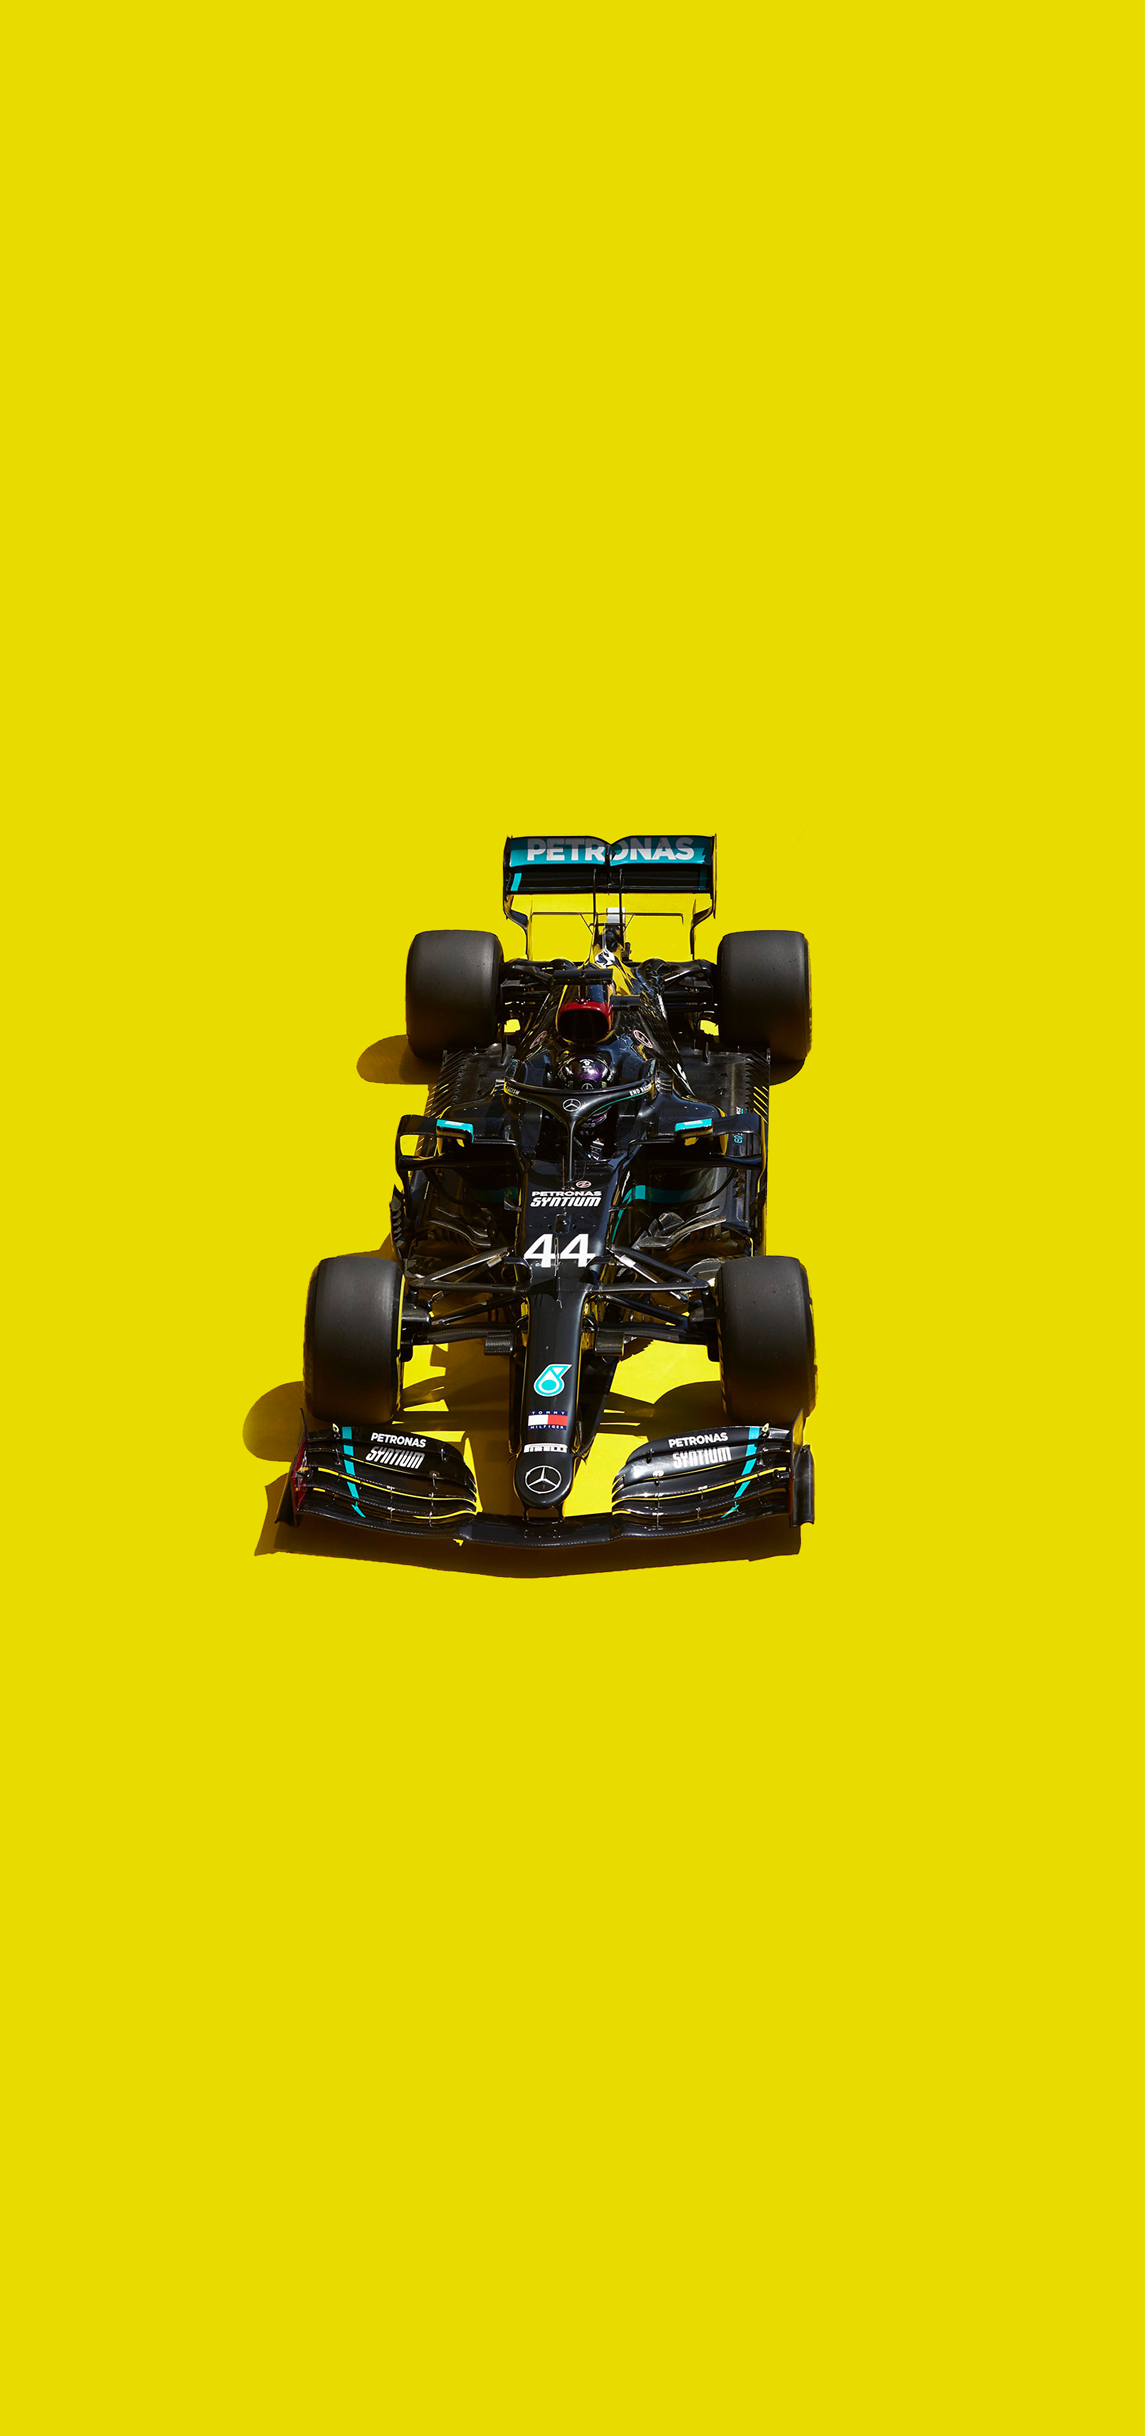 Created a wallpaper of Lewis Hamilton in the W11